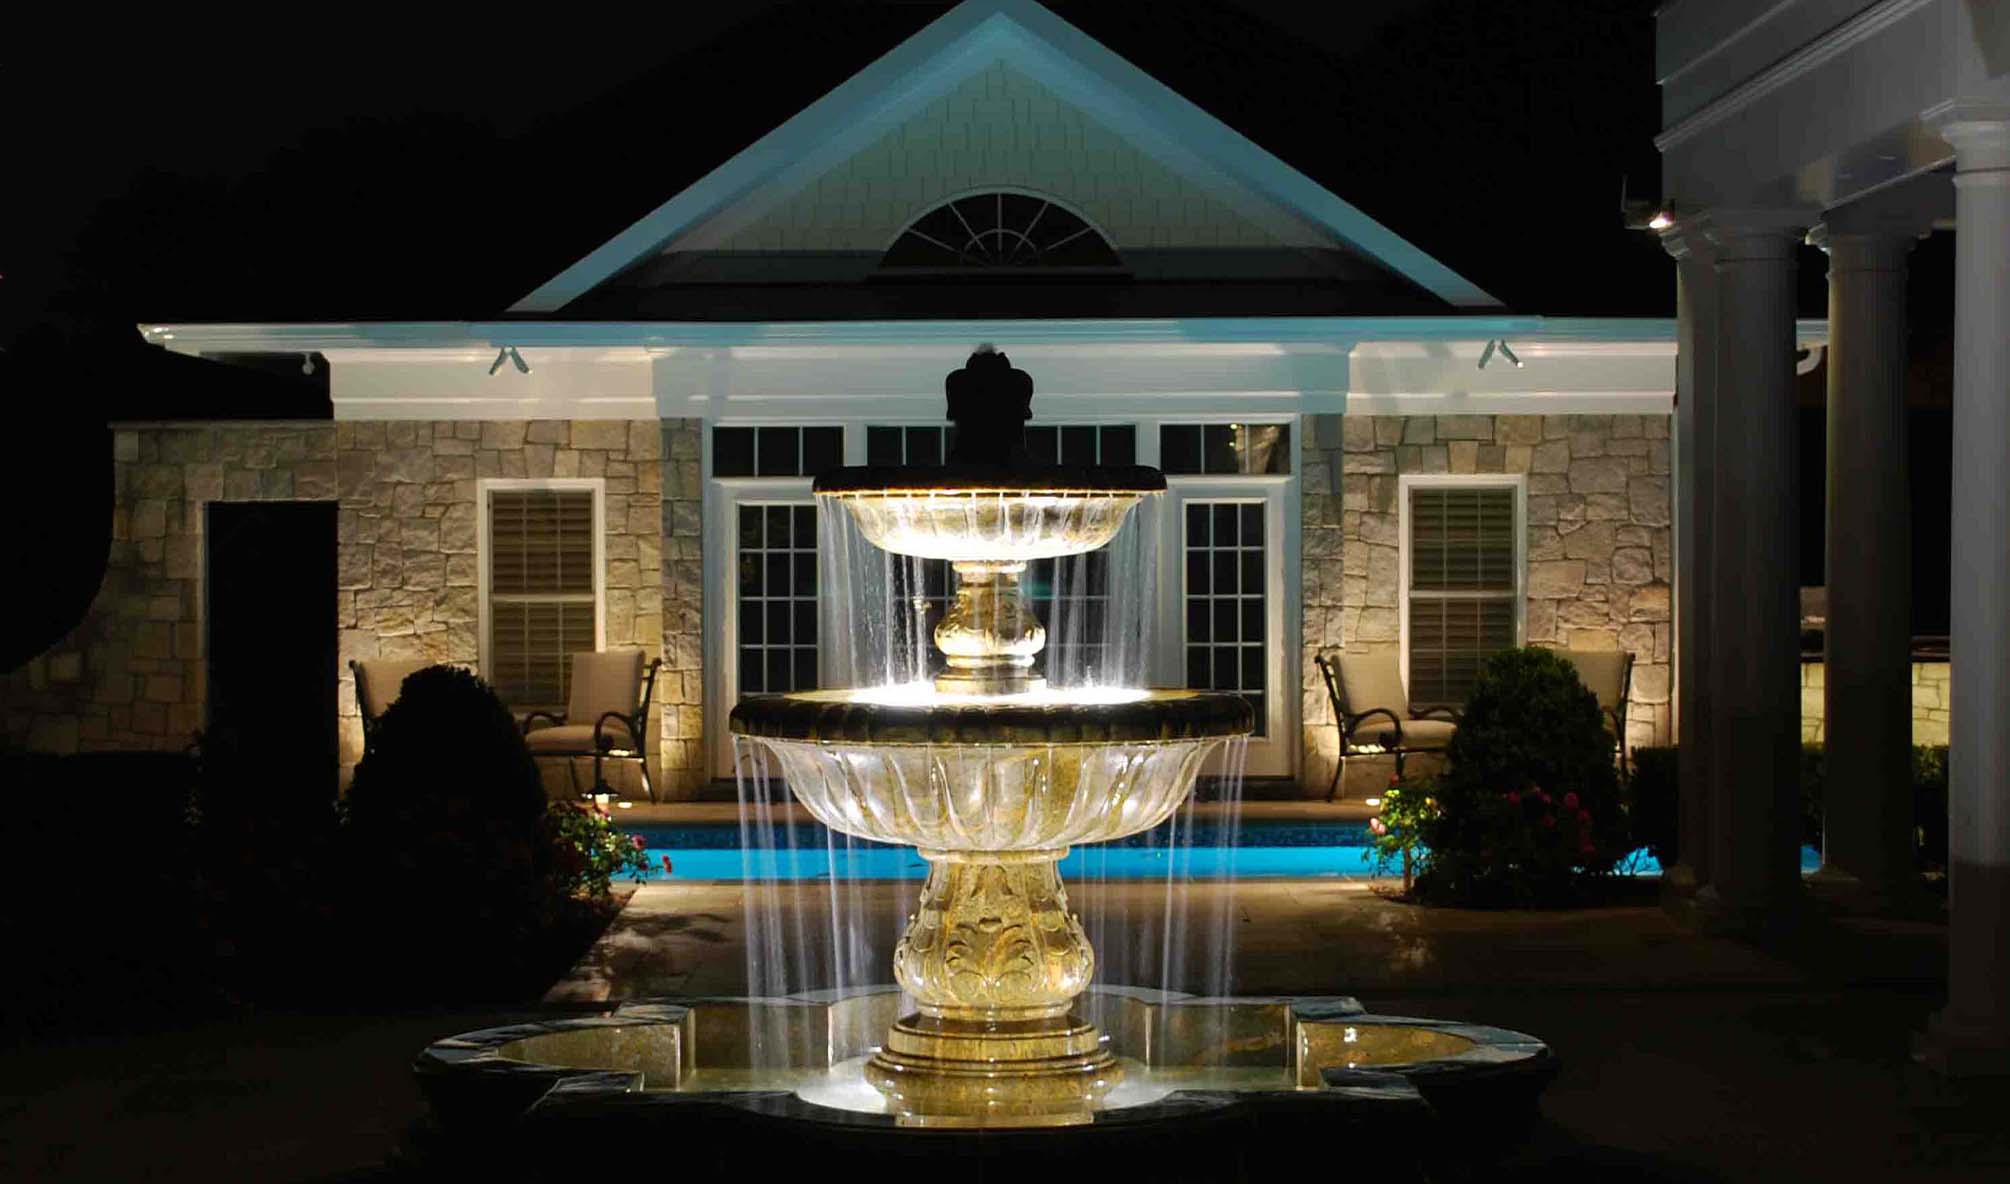 Hydroscapes Lighting For A Fountain, Pool and Back Patio At Night